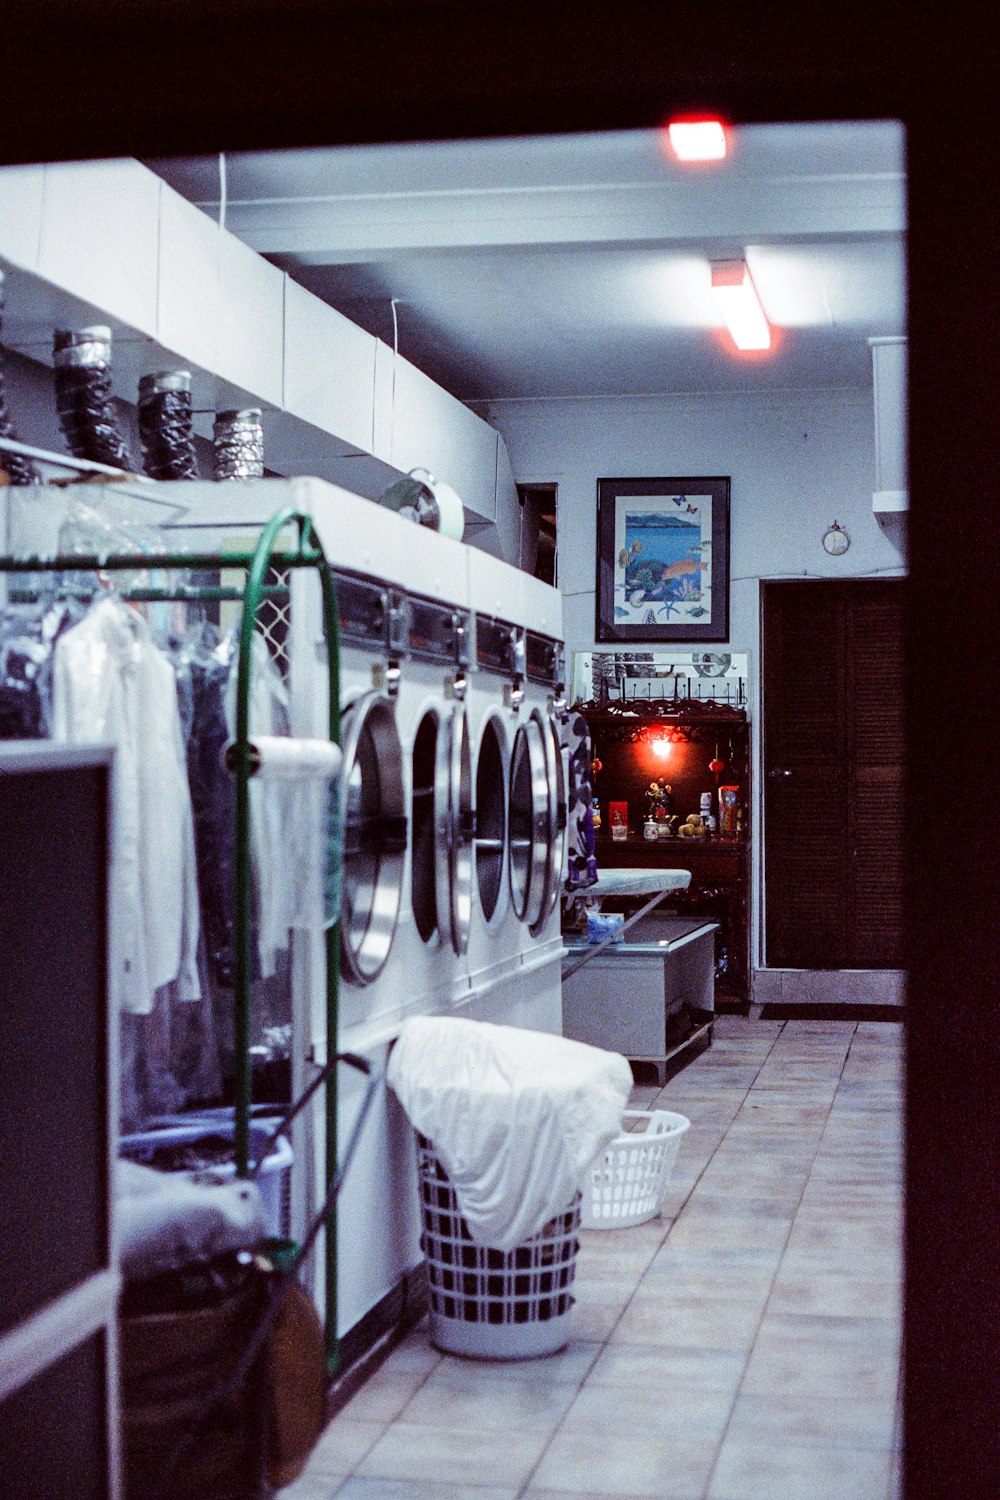 a laundry room with a washing machine and dryer